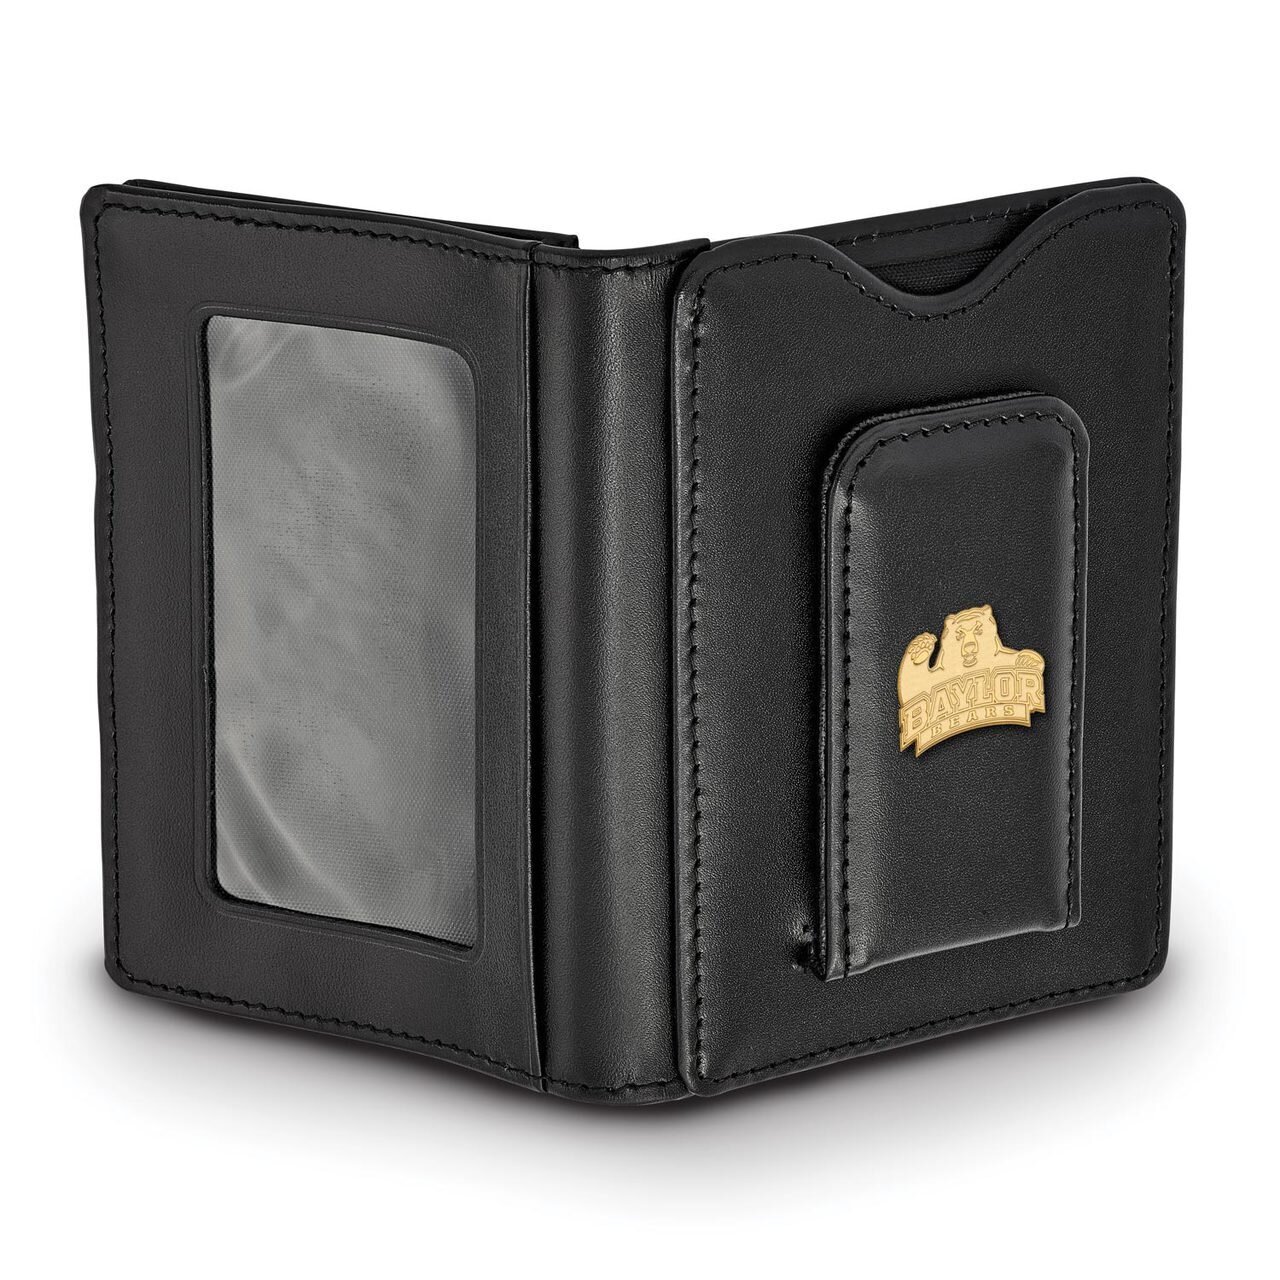 Baylor University Black Leather Wallet Gold-plated Silver on Leather GP012BU-W1